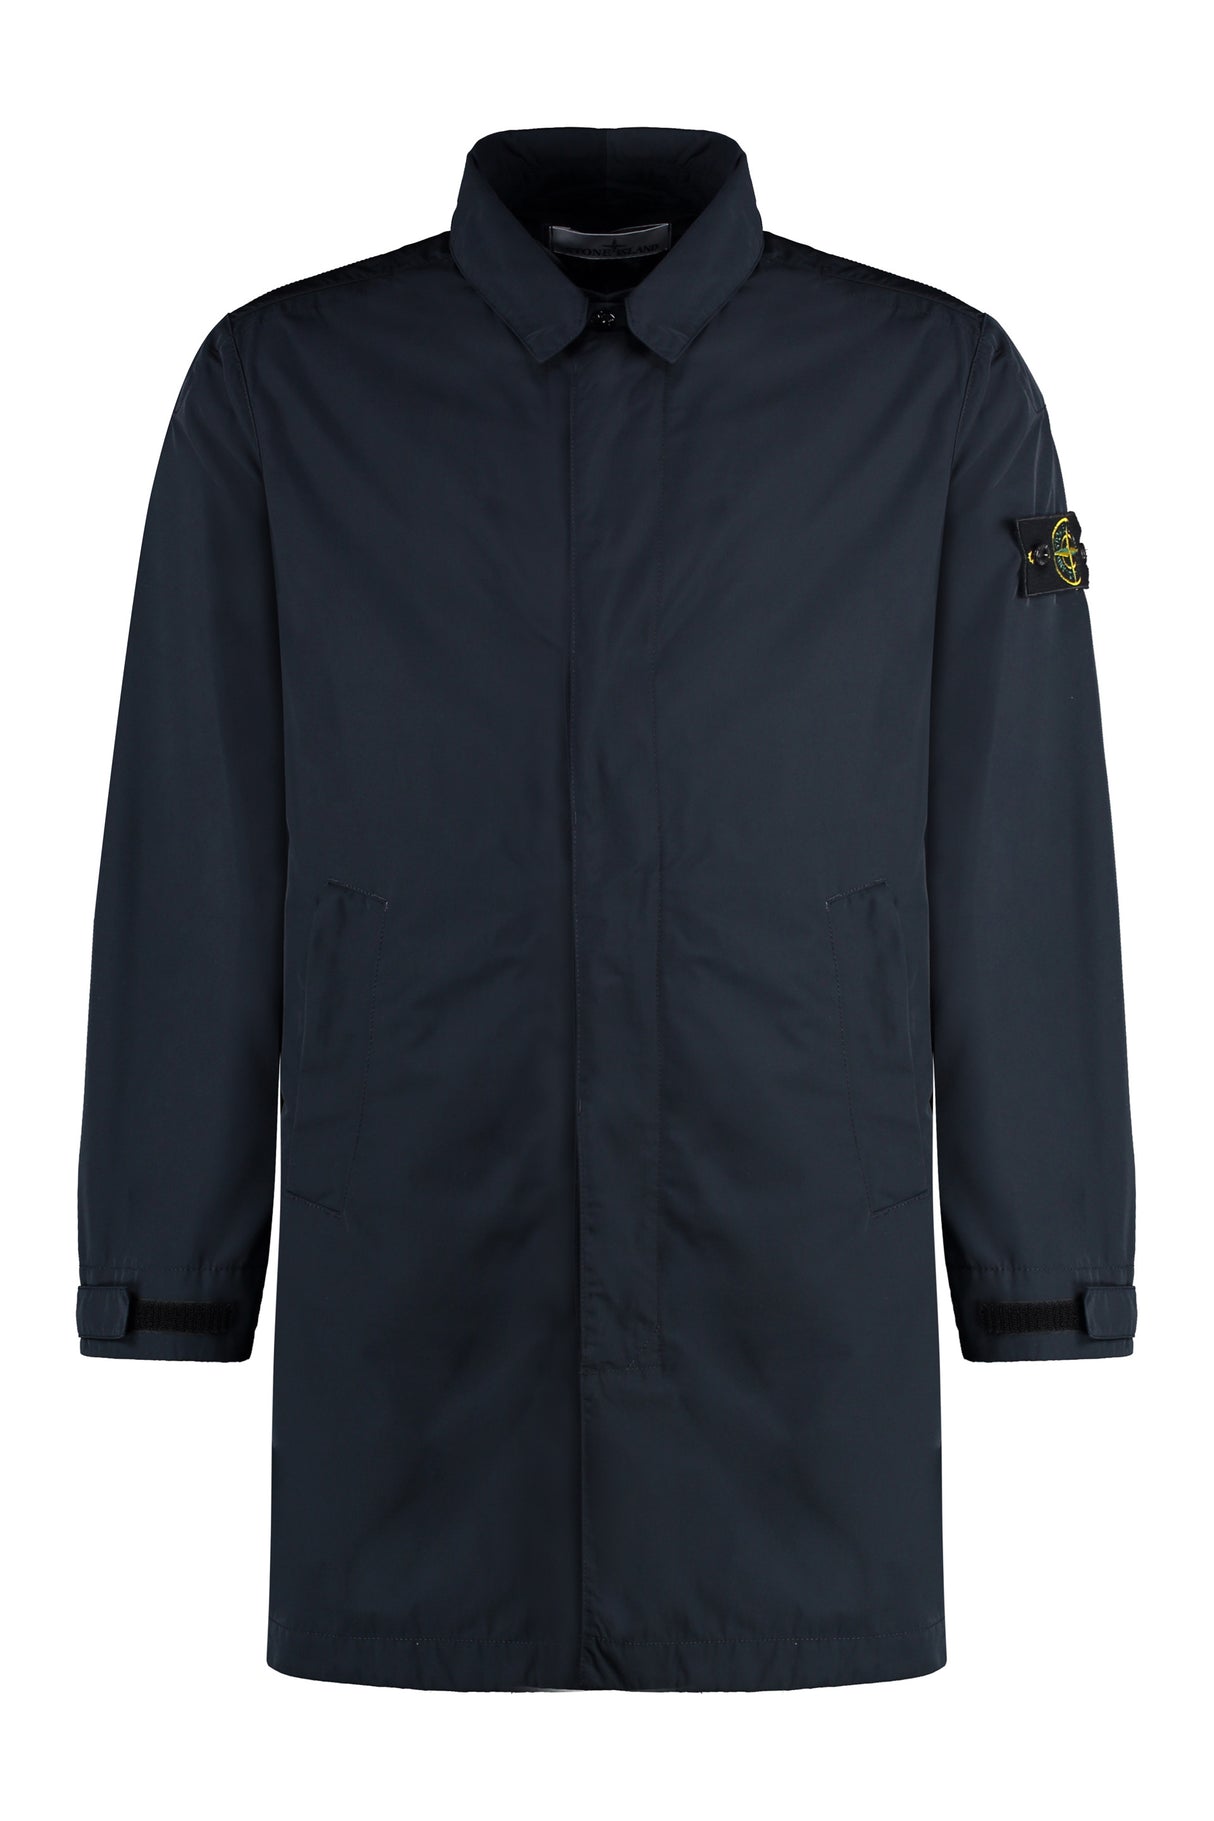 STONE ISLAND Men's Blue Techno Fabric Jacket with Removable Logo Patch and Adjustable Cuffs